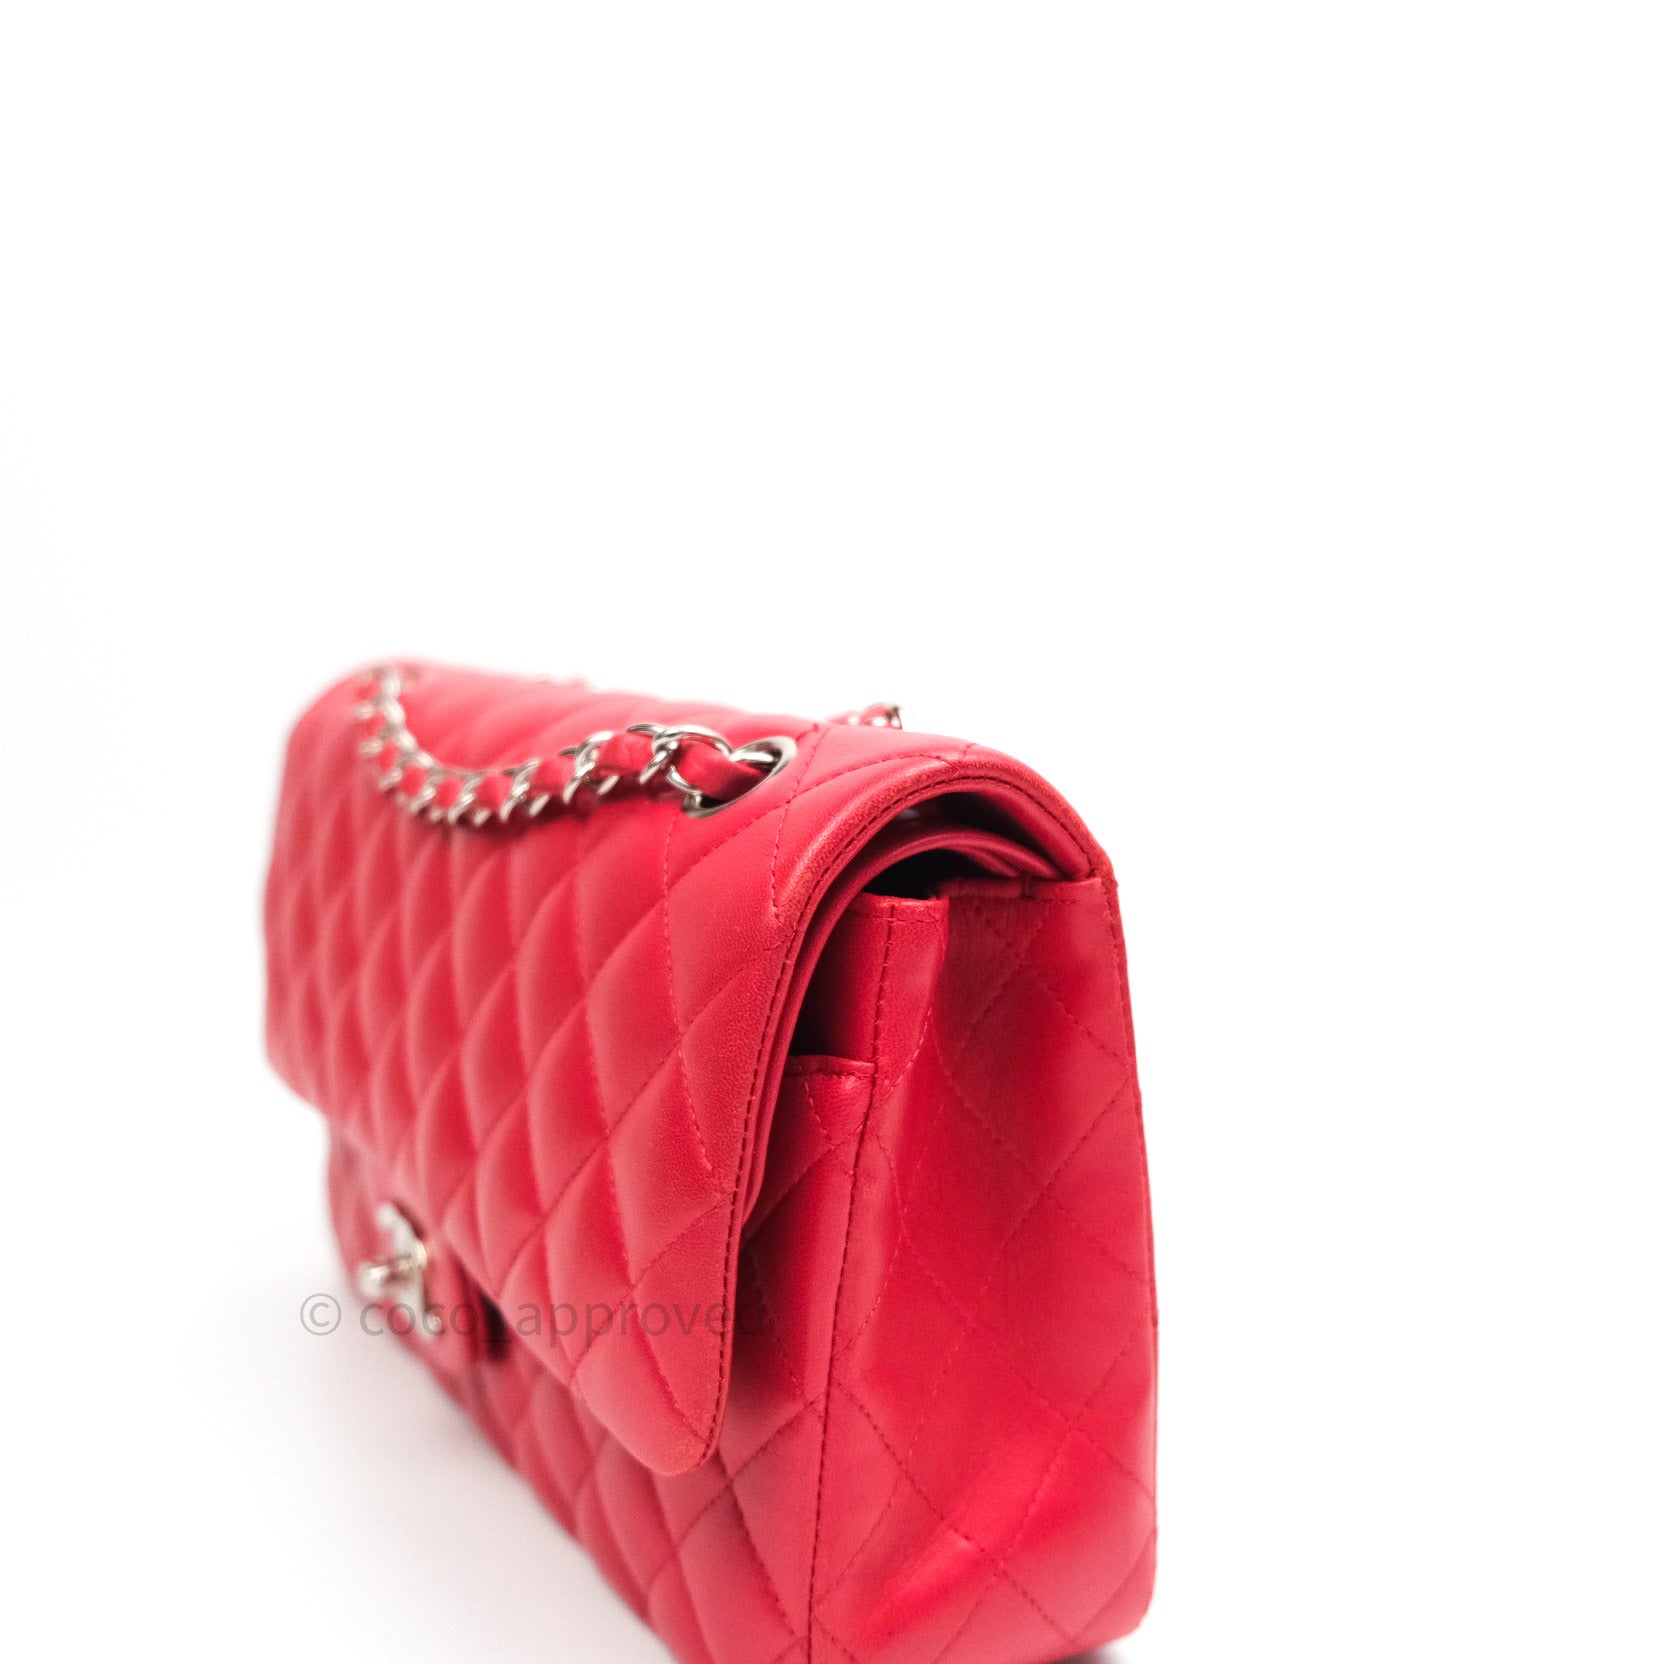 Chanel Classic M/L Medium Double Flap Bag Red Lambskin Silver Hardware – Coco  Approved Studio